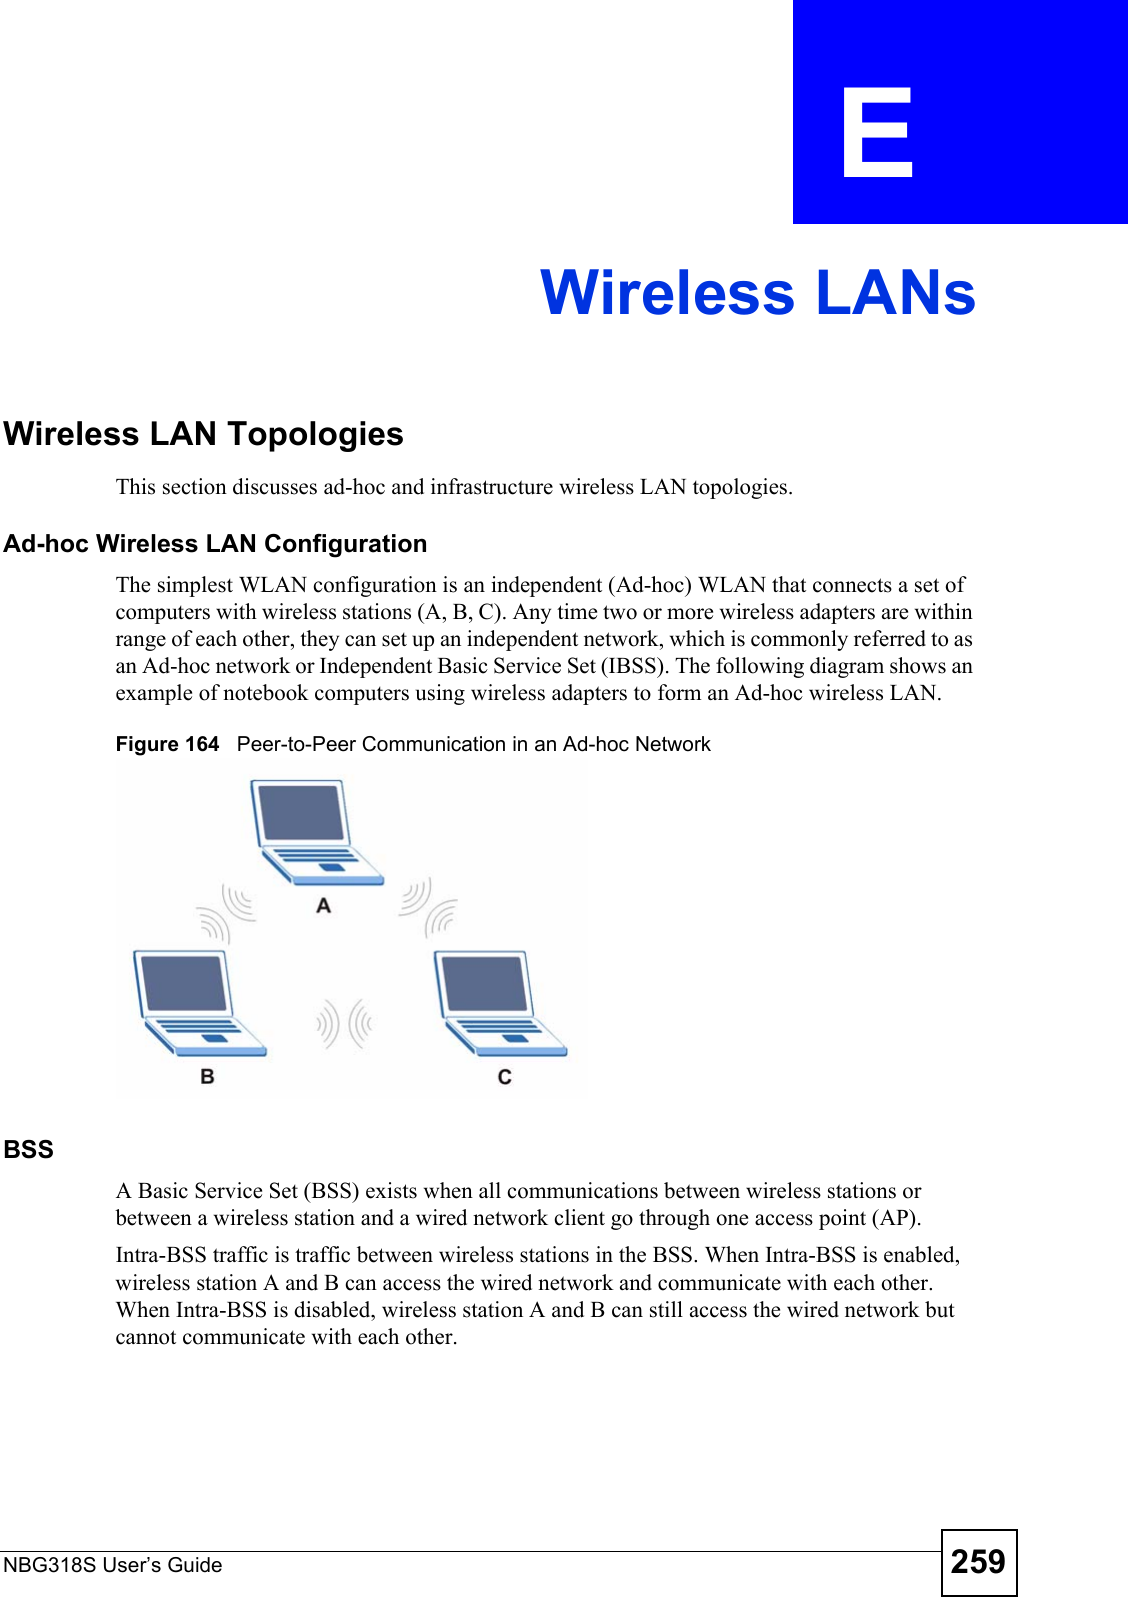 NBG318S User’s Guide 259APPENDIX  E Wireless LANsWireless LAN TopologiesThis section discusses ad-hoc and infrastructure wireless LAN topologies.Ad-hoc Wireless LAN ConfigurationThe simplest WLAN configuration is an independent (Ad-hoc) WLAN that connects a set of computers with wireless stations (A, B, C). Any time two or more wireless adapters are within range of each other, they can set up an independent network, which is commonly referred to as an Ad-hoc network or Independent Basic Service Set (IBSS). The following diagram shows an example of notebook computers using wireless adapters to form an Ad-hoc wireless LAN. Figure 164   Peer-to-Peer Communication in an Ad-hoc NetworkBSSA Basic Service Set (BSS) exists when all communications between wireless stations or between a wireless station and a wired network client go through one access point (AP). Intra-BSS traffic is traffic between wireless stations in the BSS. When Intra-BSS is enabled, wireless station A and B can access the wired network and communicate with each other. When Intra-BSS is disabled, wireless station A and B can still access the wired network but cannot communicate with each other.